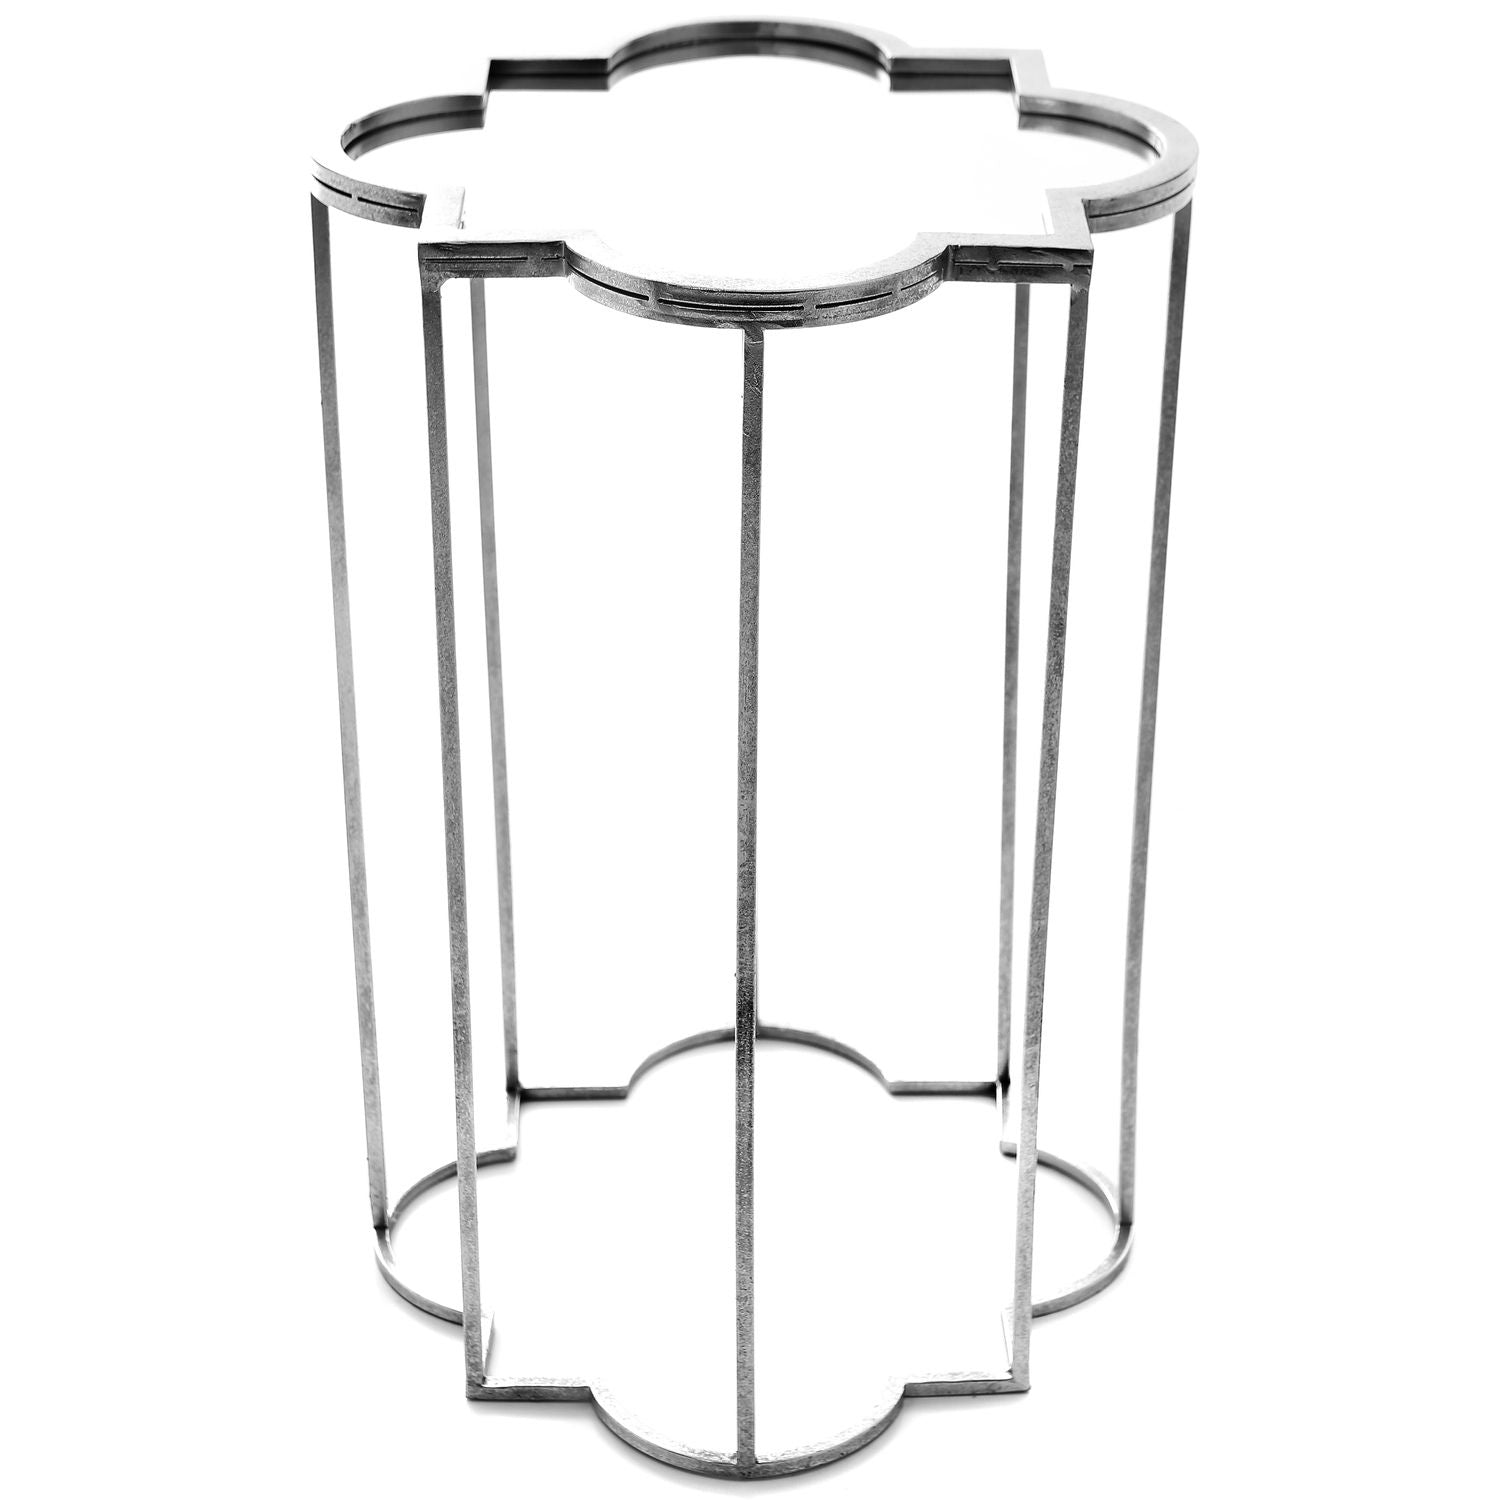 Two foil silver mirrored side tables